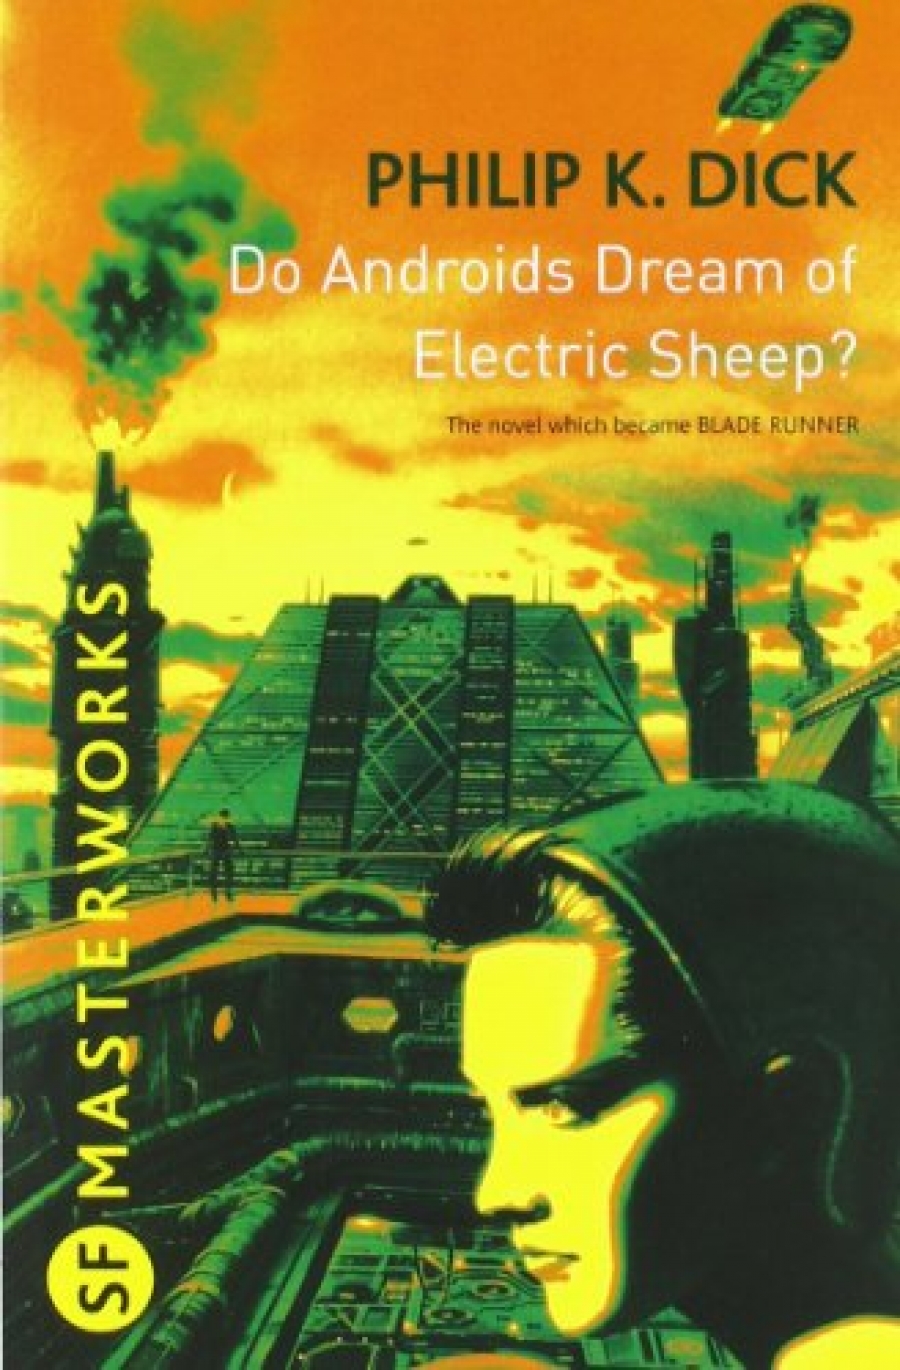 Philip K. Dick Do Androids Dream of Electric Sheep? 